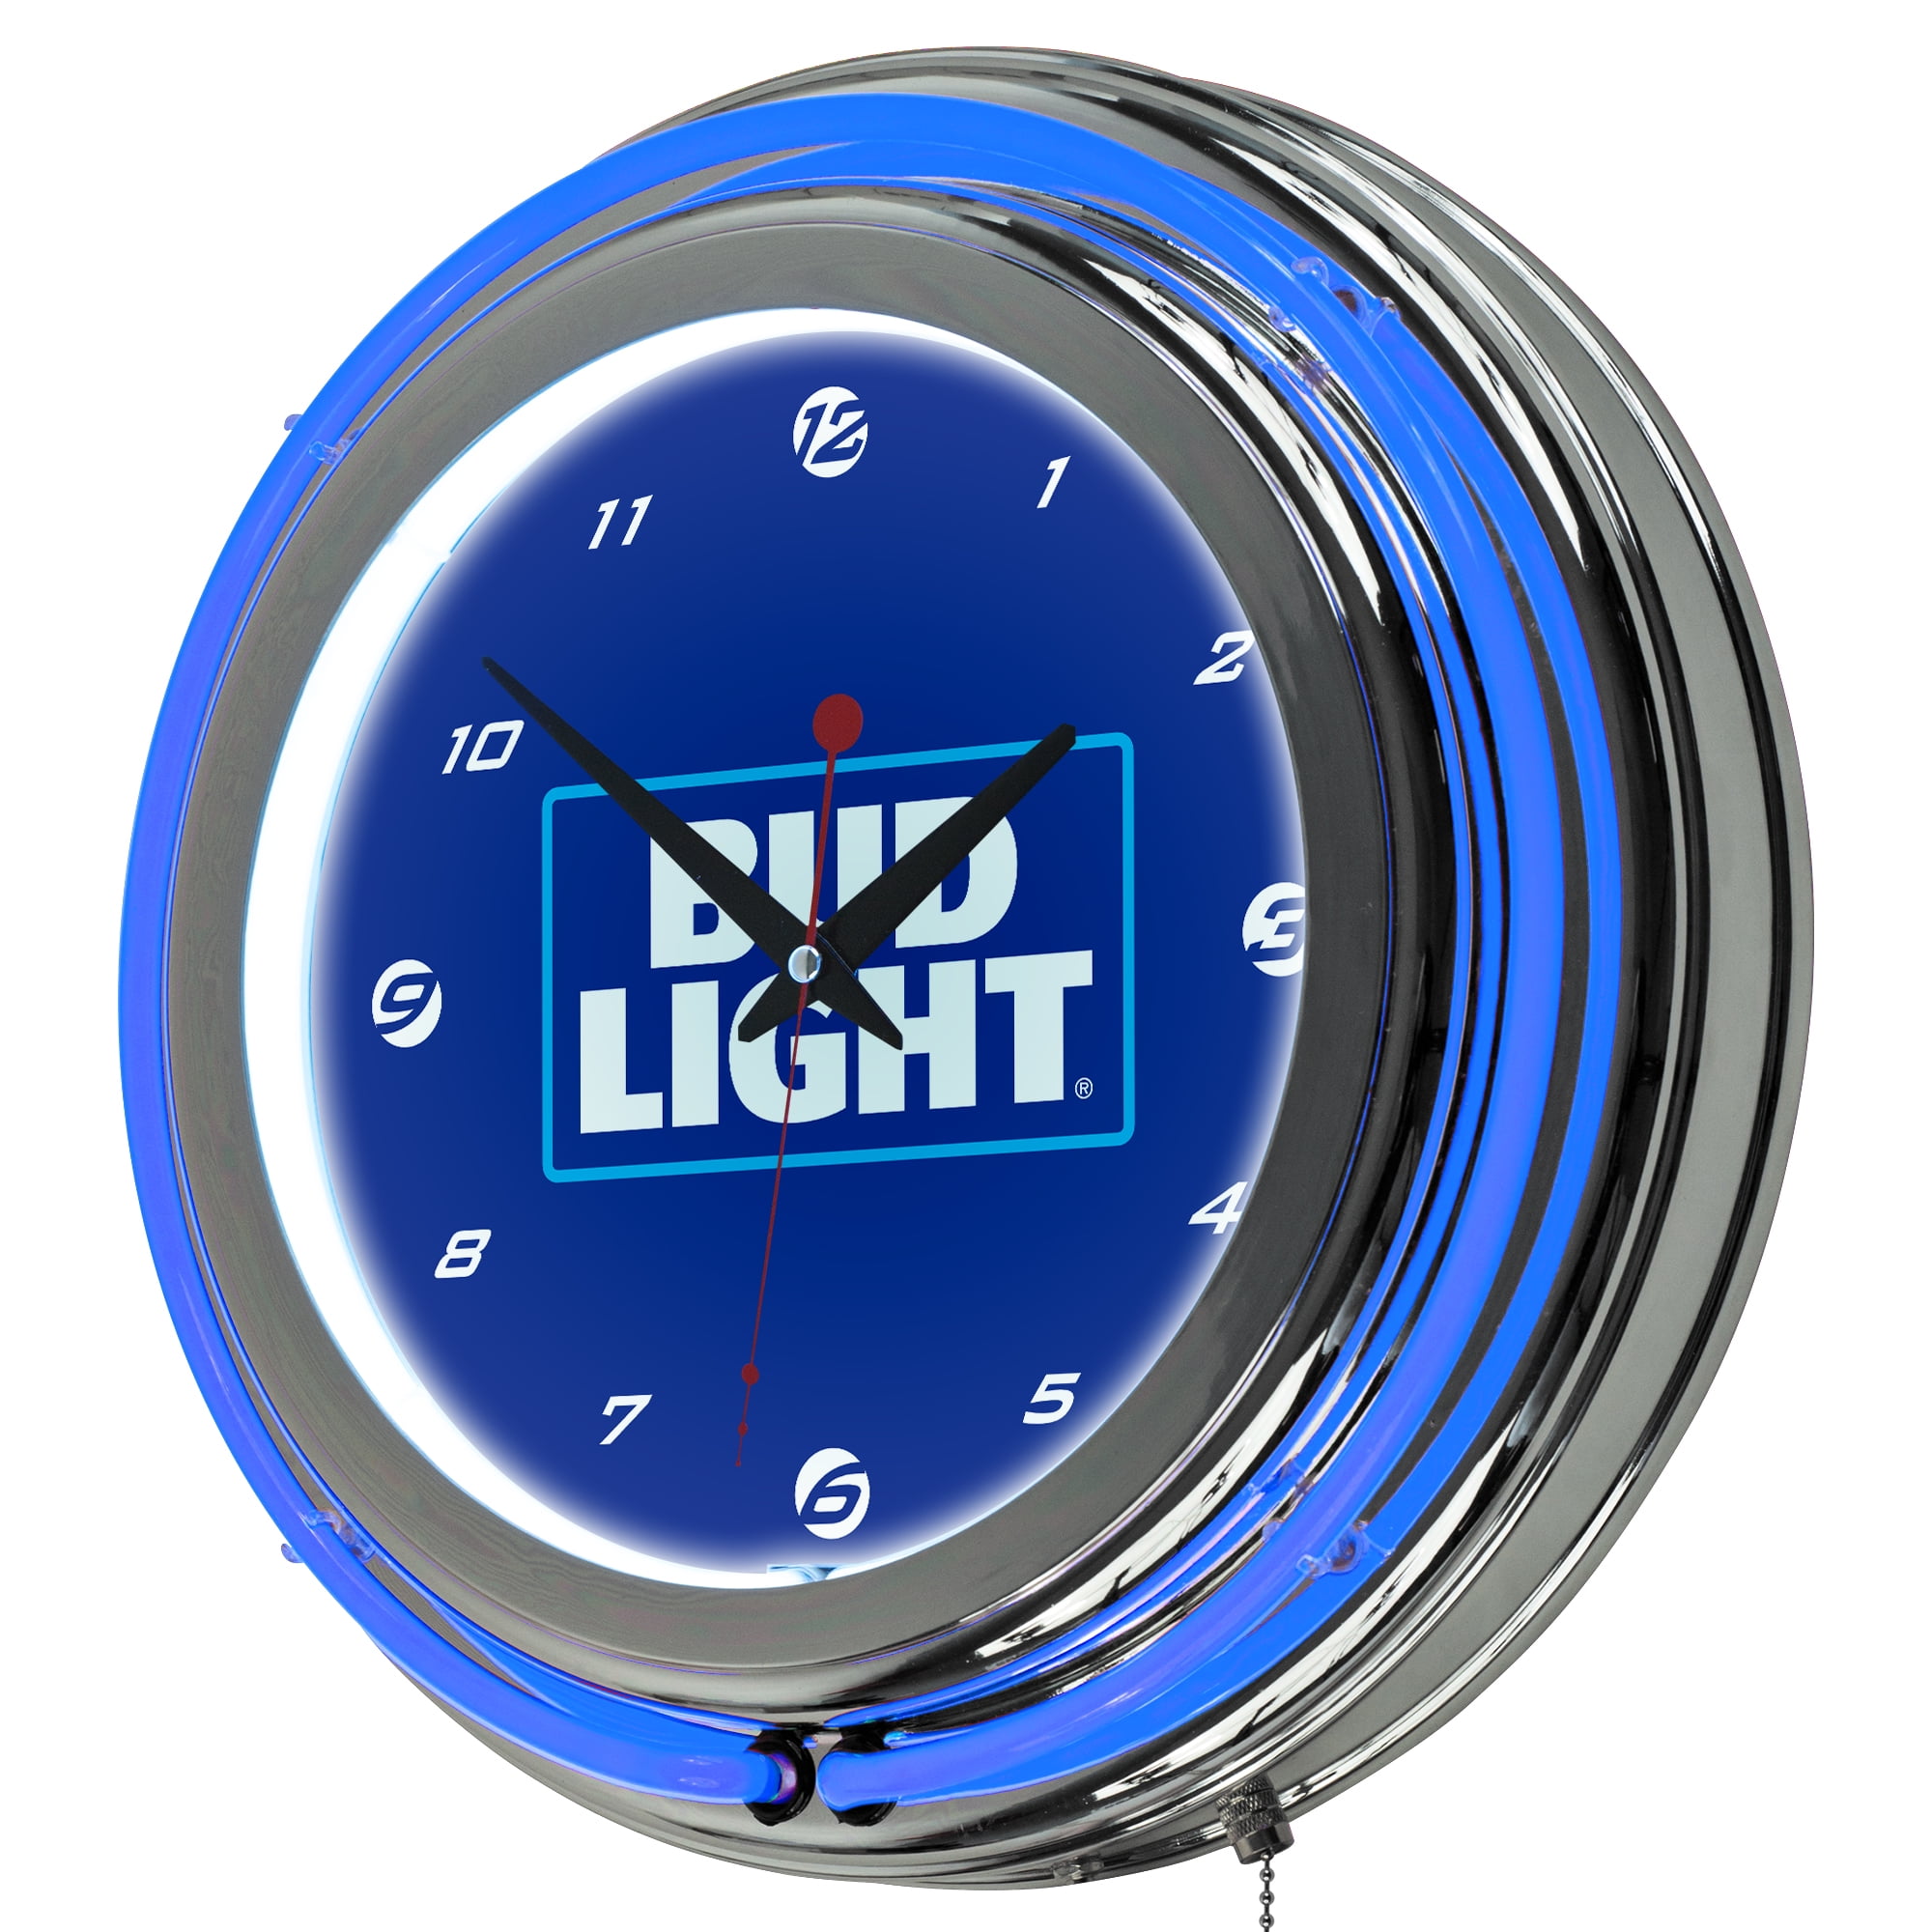 Ford Genuine Parts Neon Wall Clock